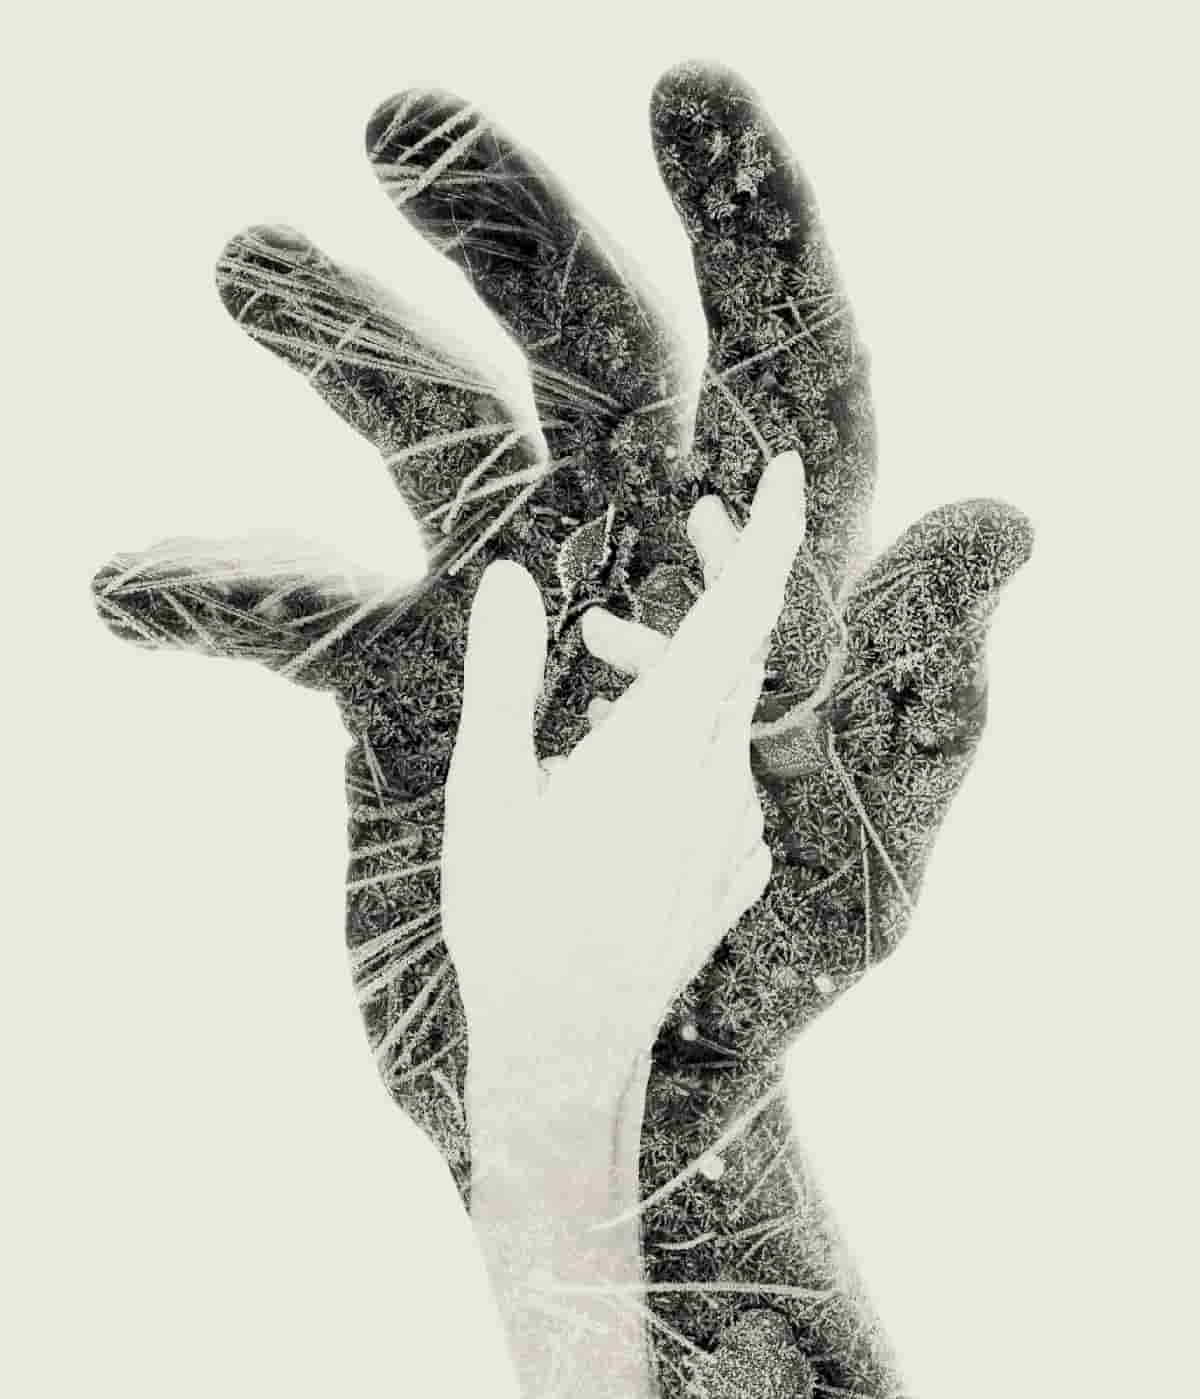 Human Subjects to the [Ongoing Coronavirus] Distorted by Nature in Double-Exposure Photographs by More of Works